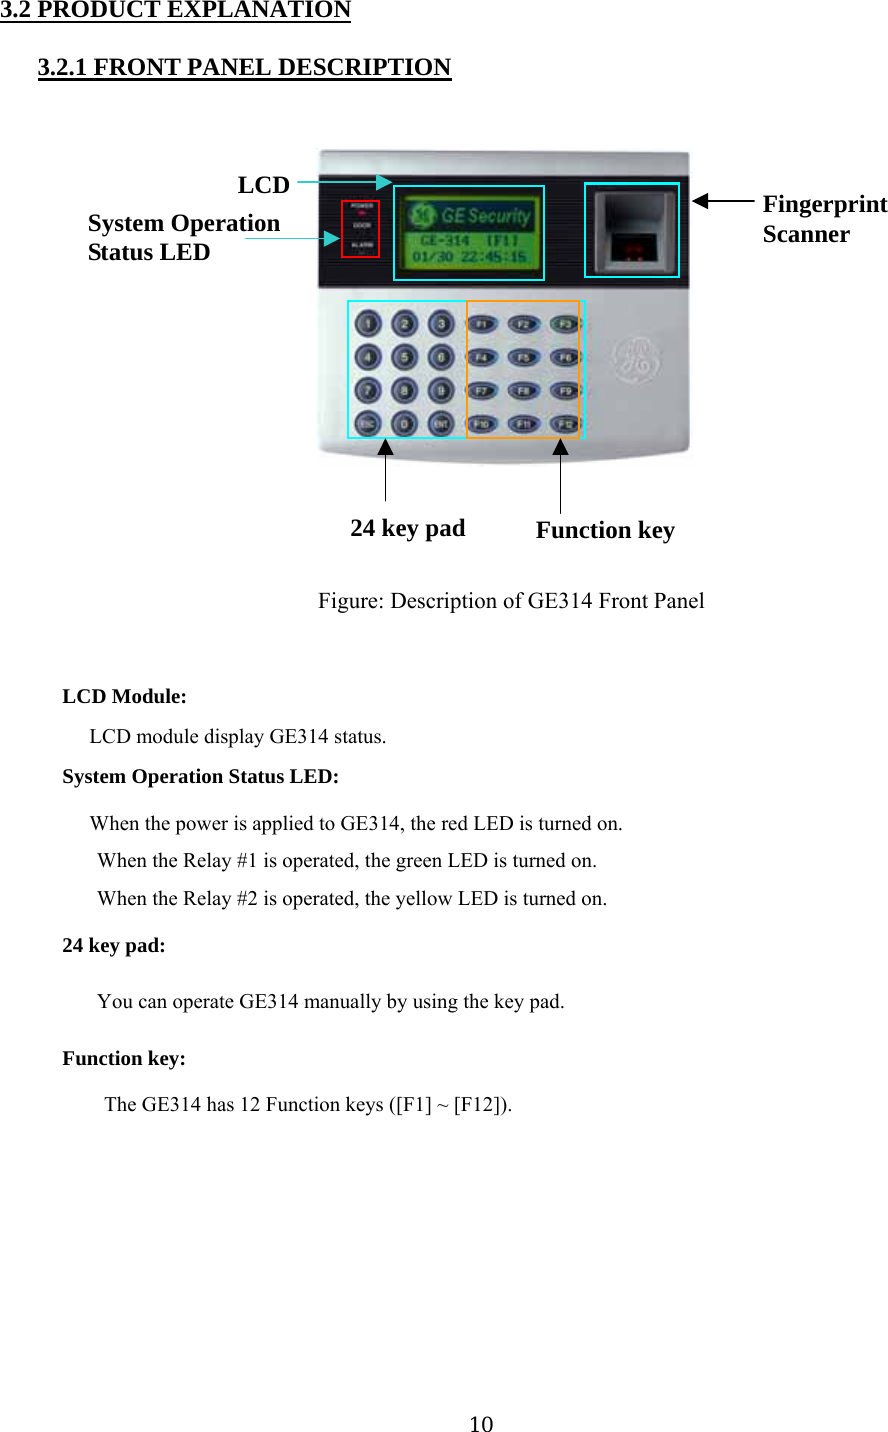 3.2 PRODUCT EXPLANATION 3.2.1 FRONT PANEL DESCRIPTION                LCD System Operation   Status LED  Fingerprint Scanner              24 key pad   Function key                        Figure: Description of GE314 Front Panel   LCD Module: LCD module display GE314 status.   System Operation Status LED: When the power is applied to GE314, the red LED is turned on.   When the Relay #1 is operated, the green LED is turned on.   When the Relay #2 is operated, the yellow LED is turned on.   24 key pad: You can operate GE314 manually by using the key pad. Function key: The GE314 has 12 Function keys ([F1] ~ [F12]).          10